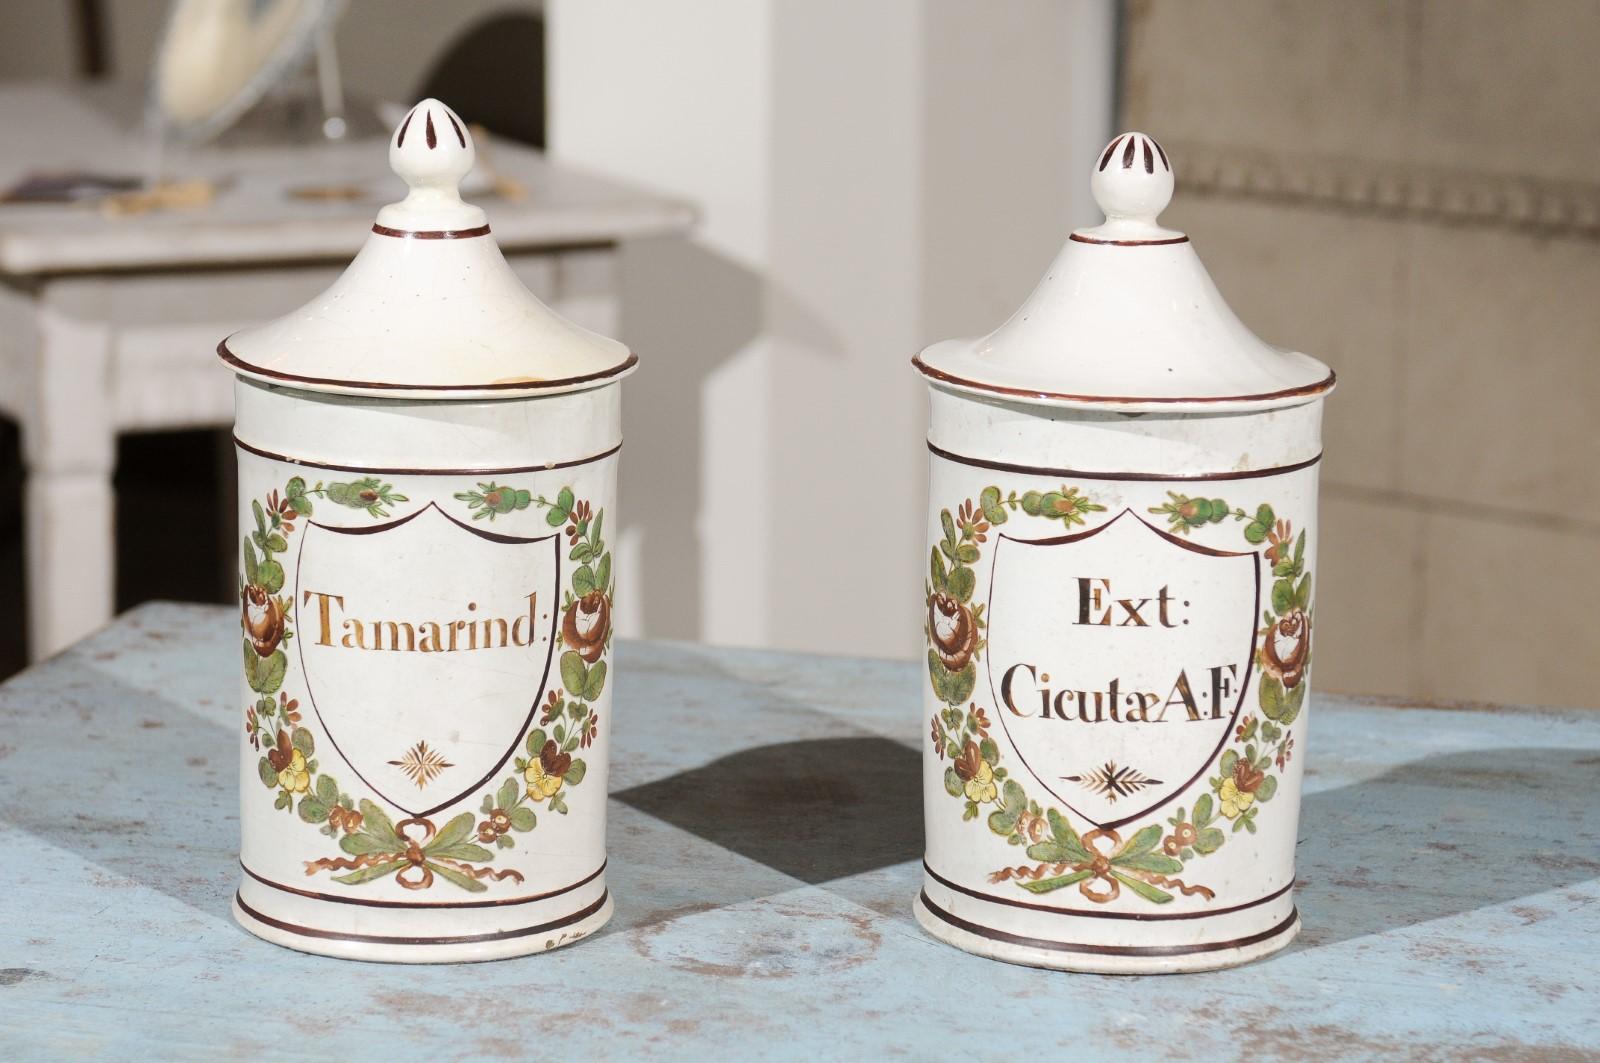 A pair of French Directoire period ceramic lidded apothecary jars from the late 18th century, with hand-painted foliage motifs, labeled Tamarind and Ext. Cicutæ A:F, from the Deroche factory. Born in France during the Directoire, each of this pair